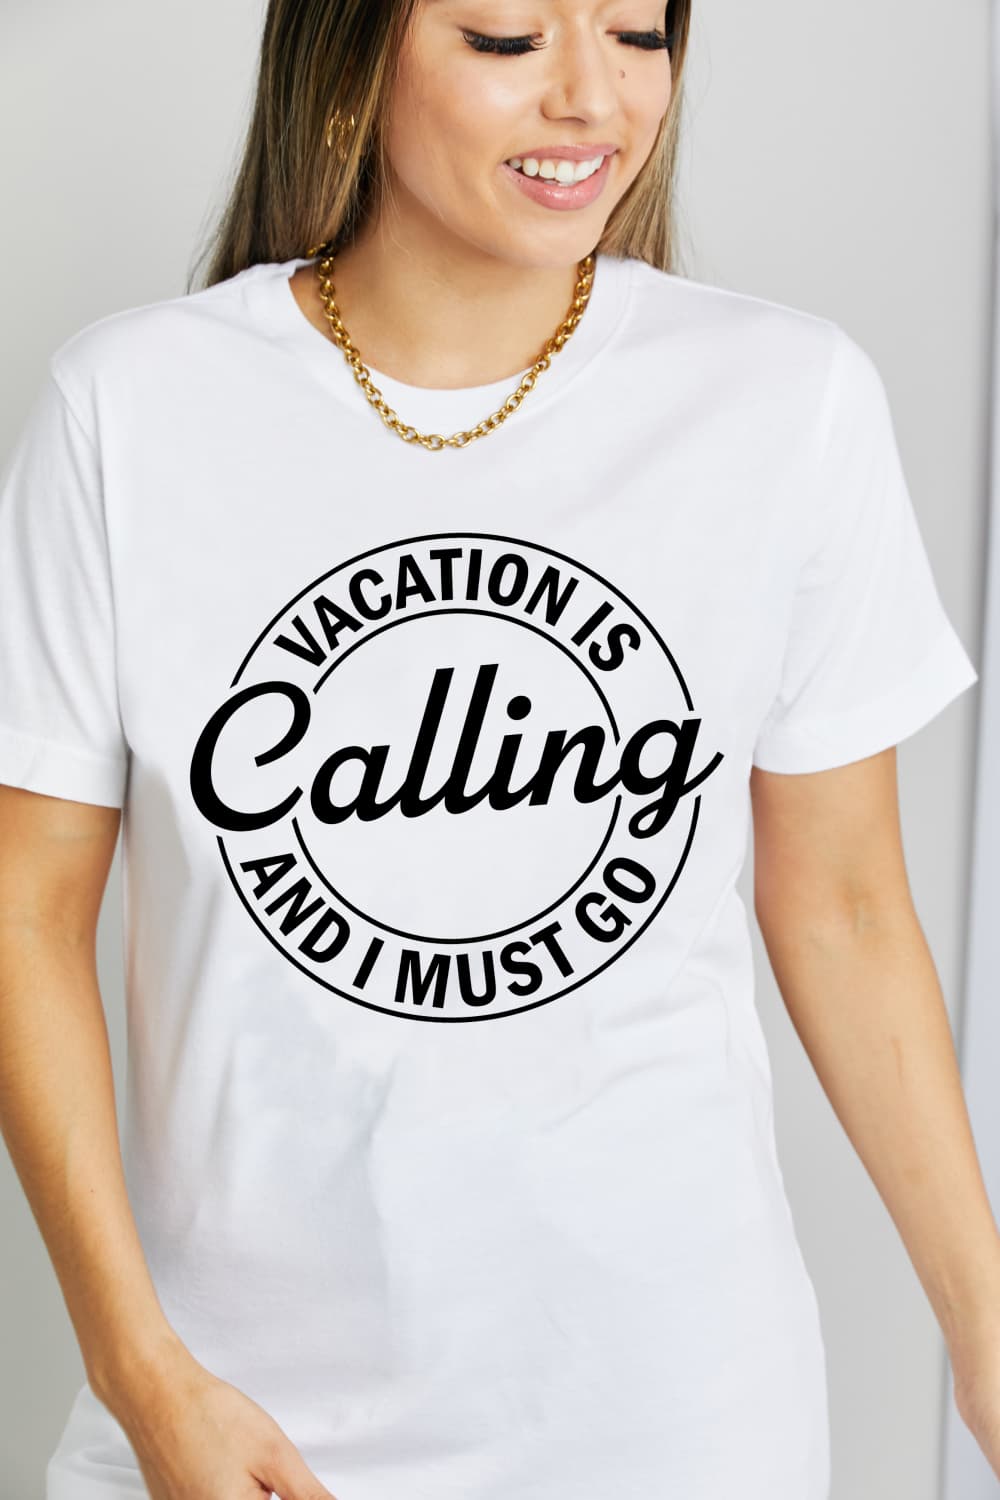 VACATION IS CALLING AND I MUST GO Graphic Cotton T-Shirt